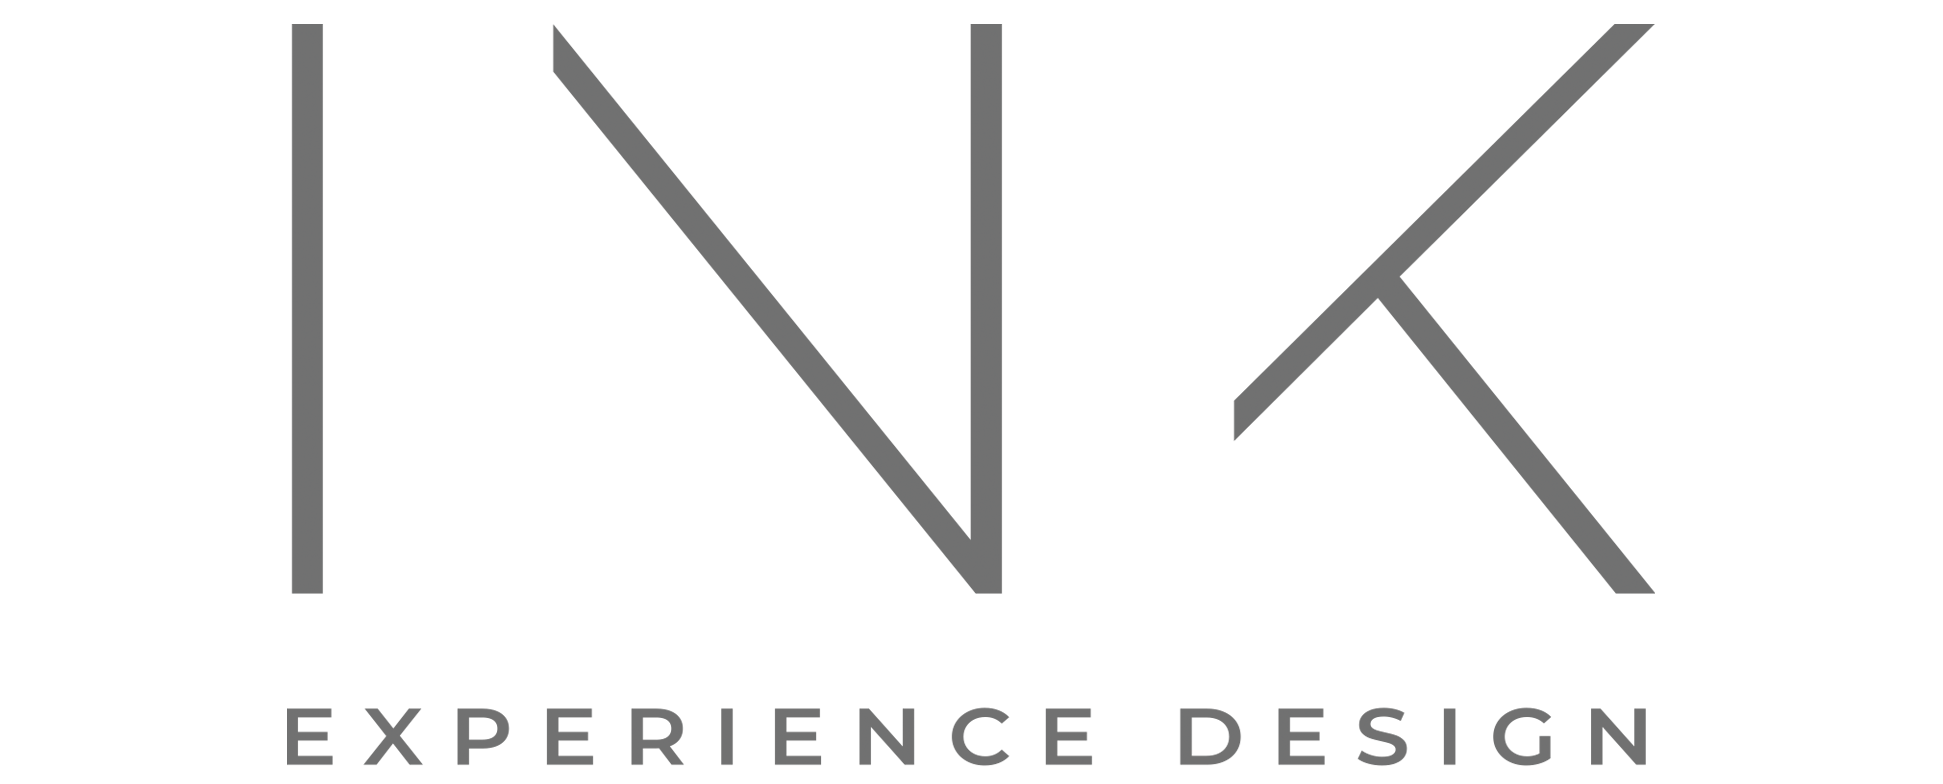 Ink experience design